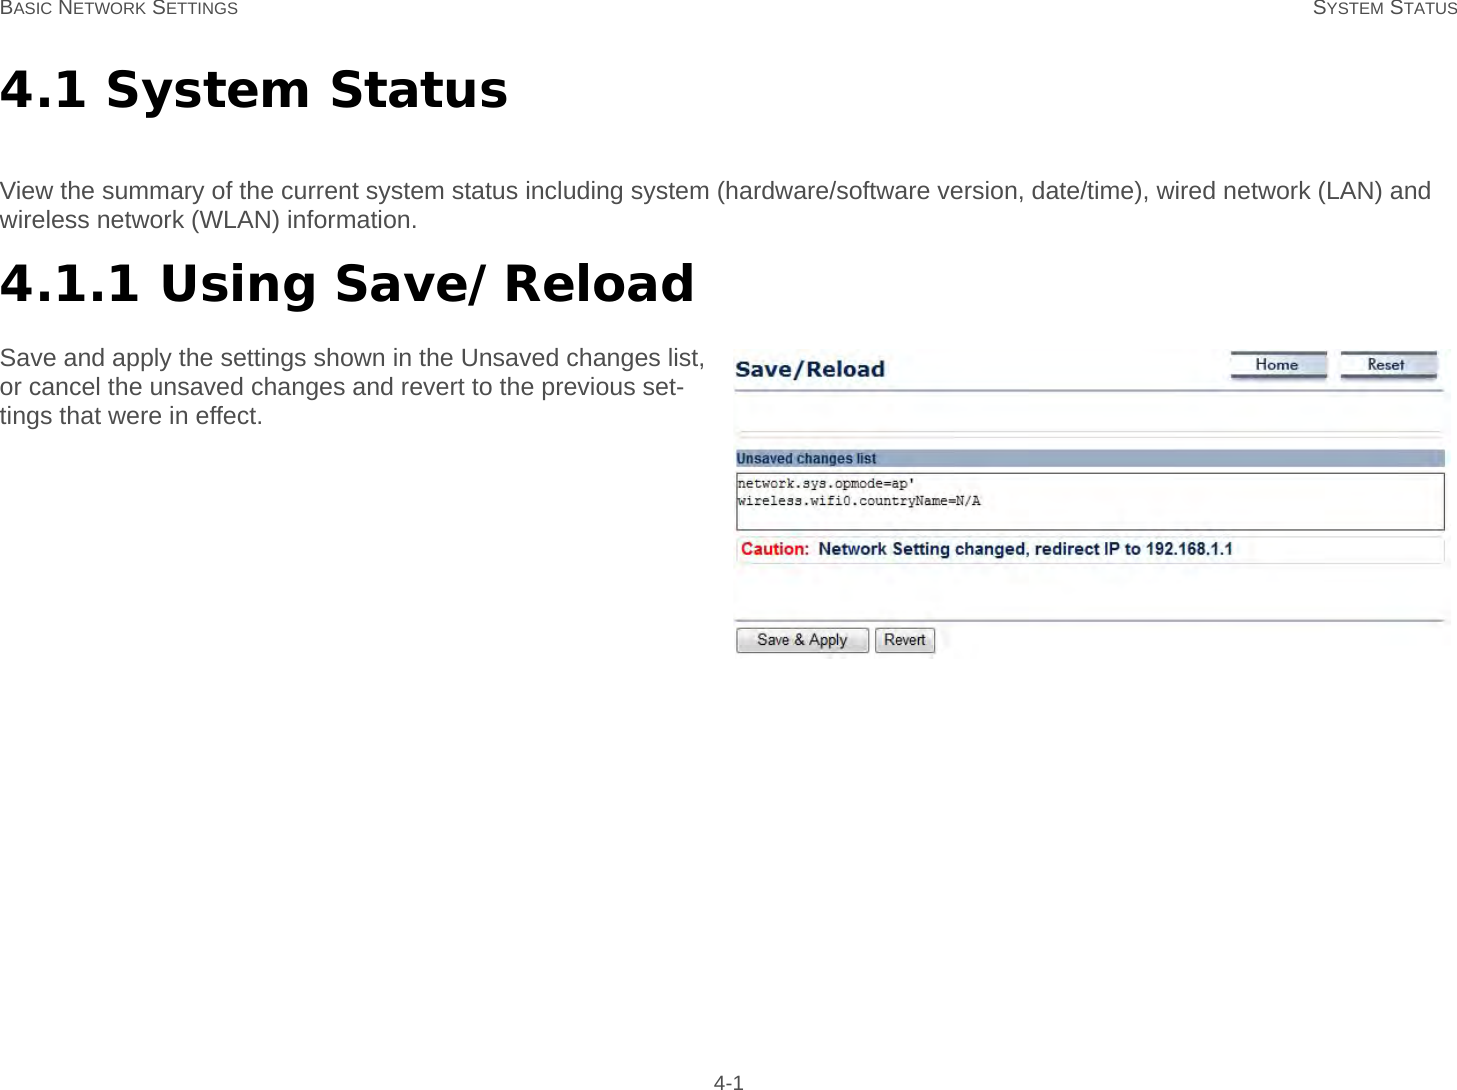 BASIC NETWORK SETTINGS SYSTEM STATUS 4-14.1 System StatusView the summary of the current system status including system (hardware/software version, date/time), wired network (LAN) and wireless network (WLAN) information.4.1.1 Using Save/ReloadSave and apply the settings shown in the Unsaved changes list, or cancel the unsaved changes and revert to the previous set-tings that were in effect.